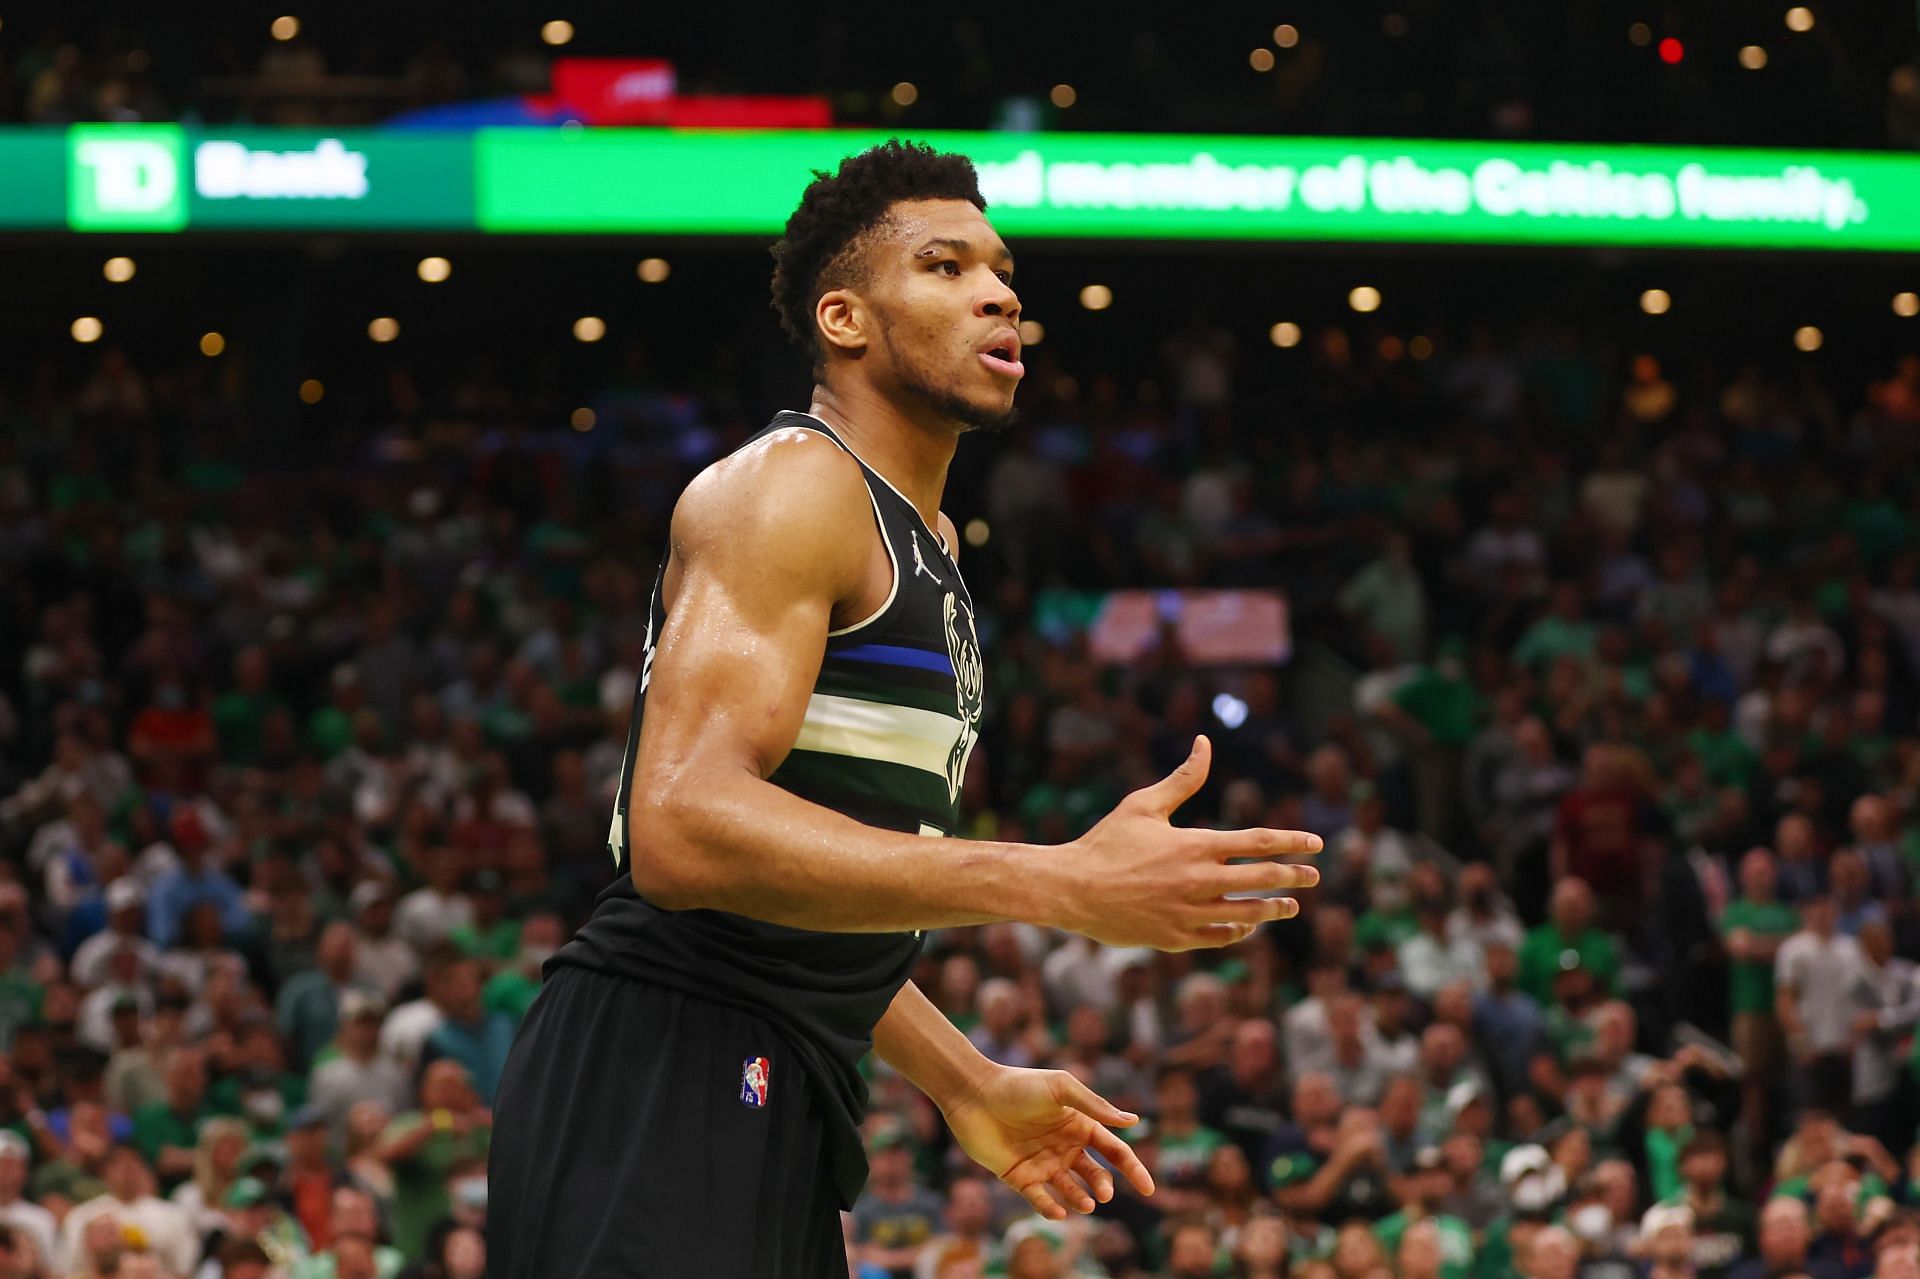 Giannis Antetokounmpo #34 of the Milwaukee Bucks reacts against the Boston Celtics during the fourth quarter in Game Seven of the 2022 NBA Playoffs Eastern Conference Semifinals at TD Garden on May 15, 2022 in Boston, Massachusetts